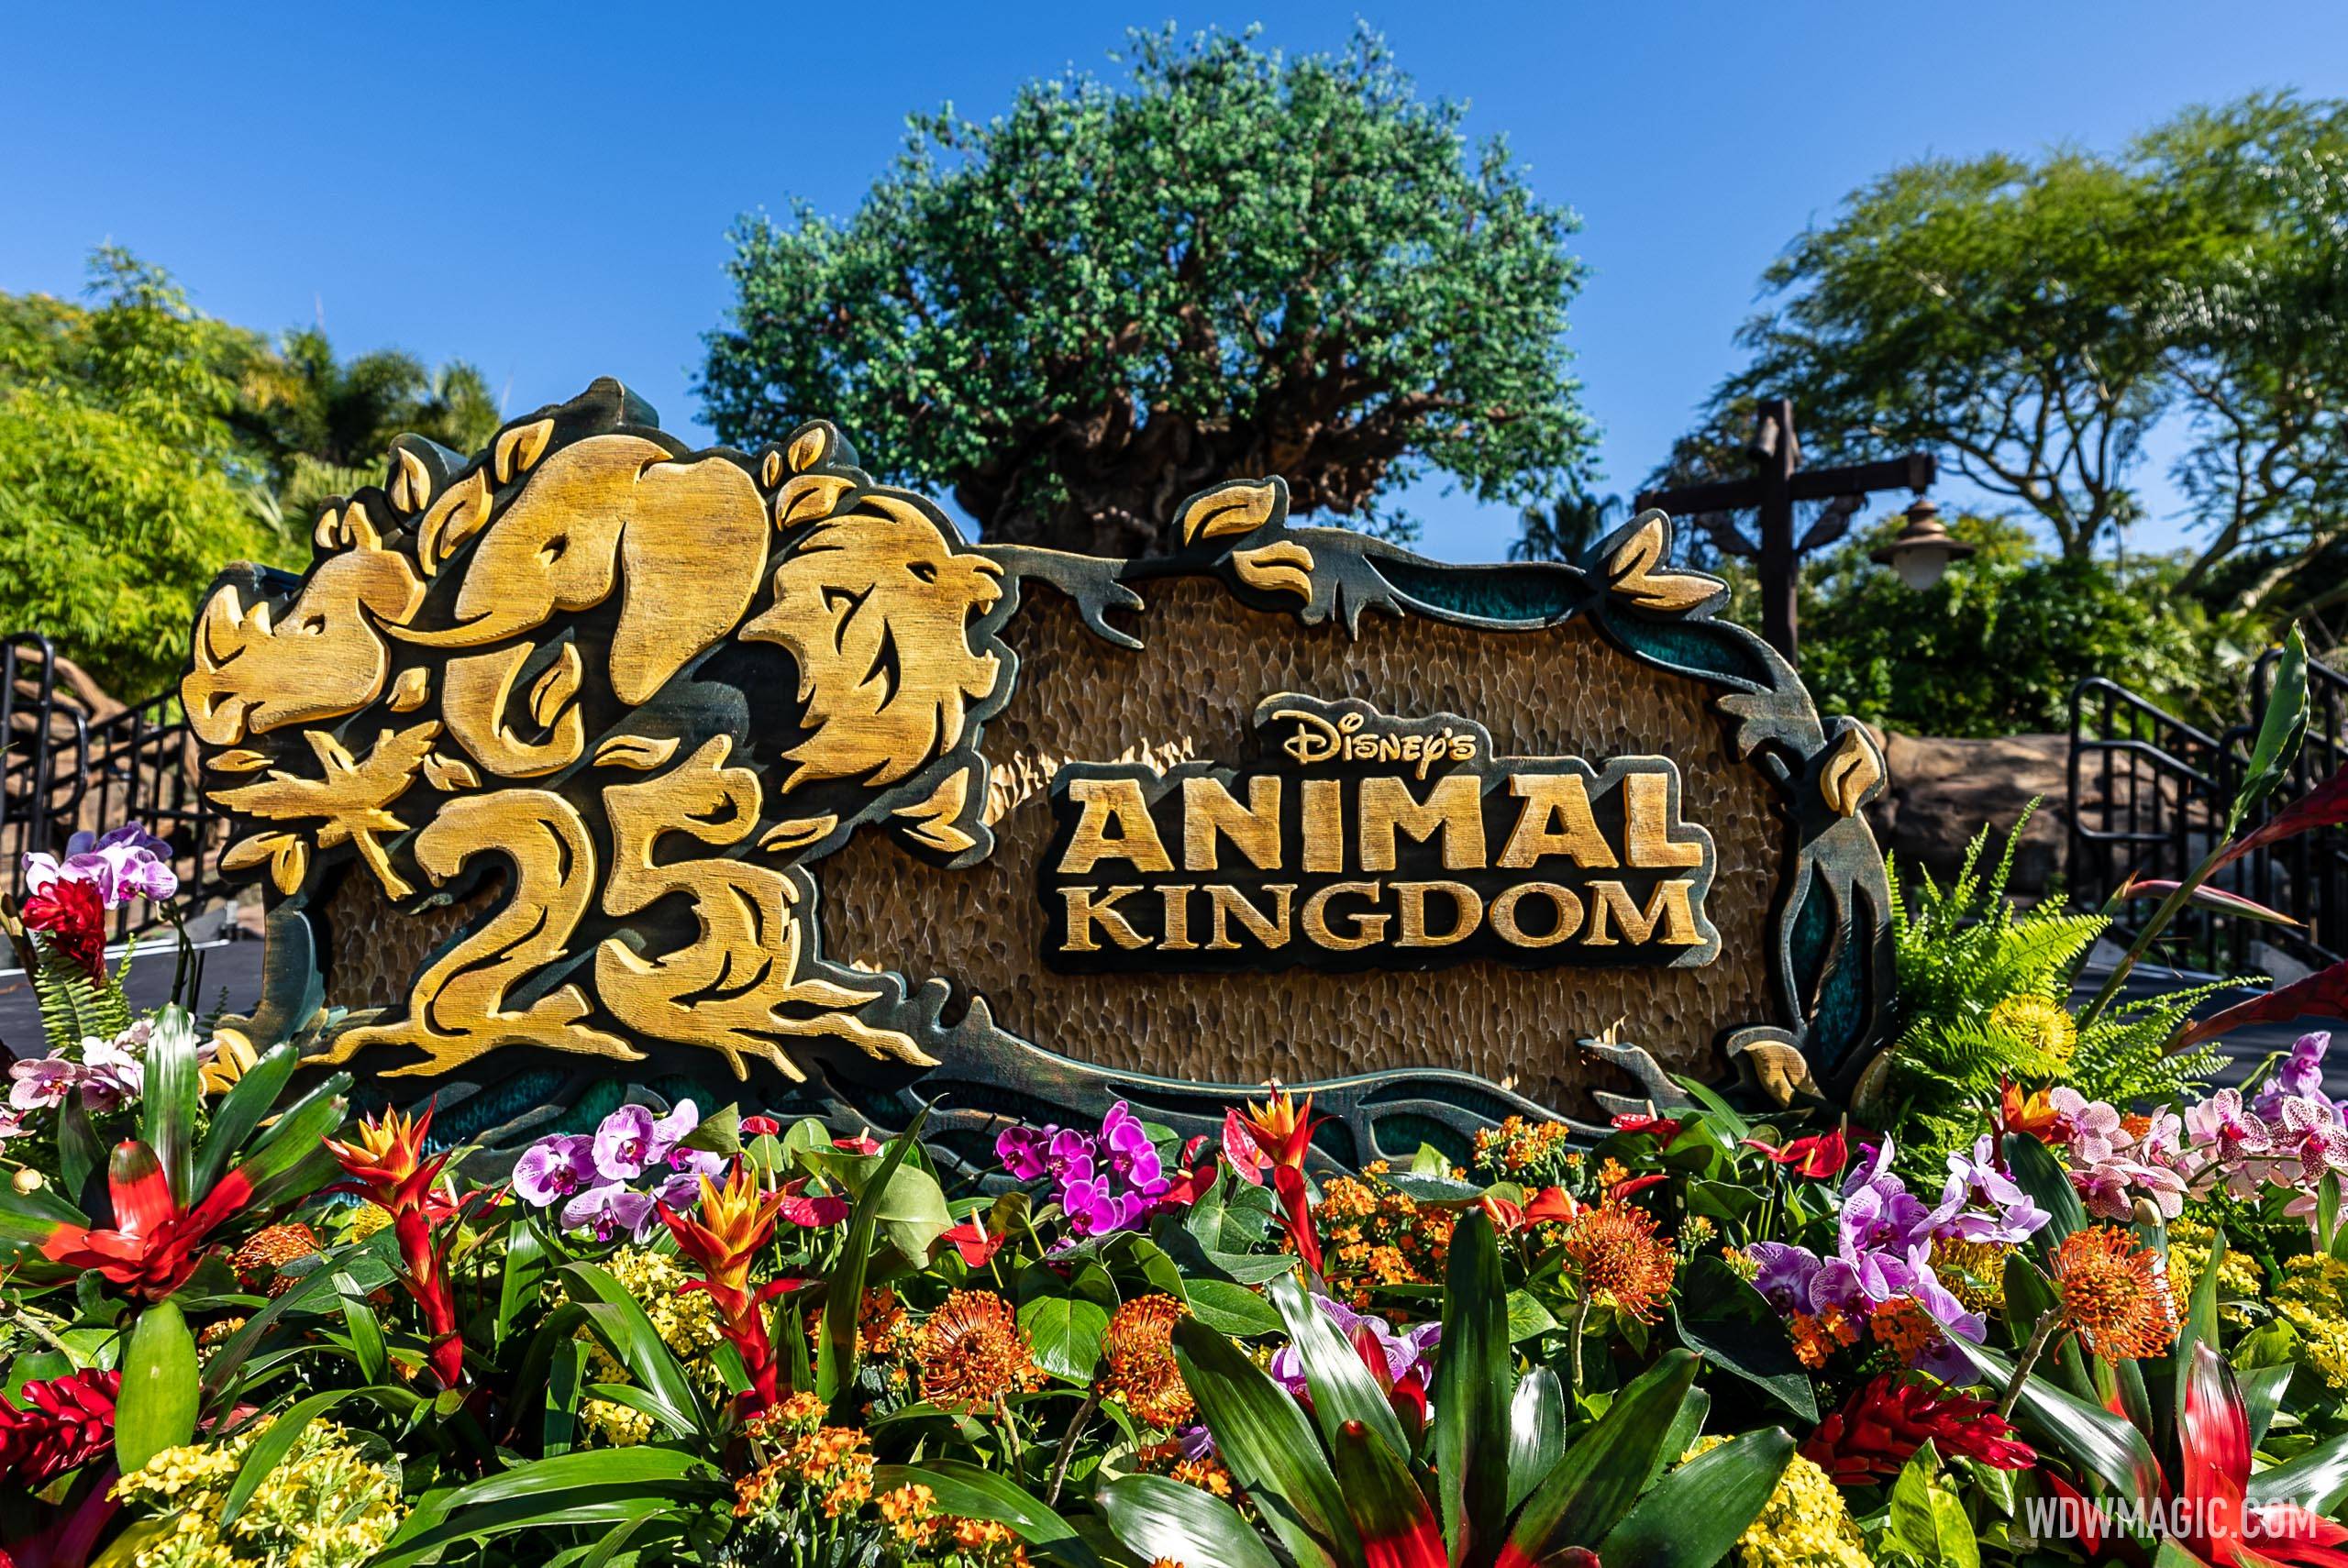 Disney digs up a time capsule buried by cast members at Disney's Animal Kingdom 25 years ago